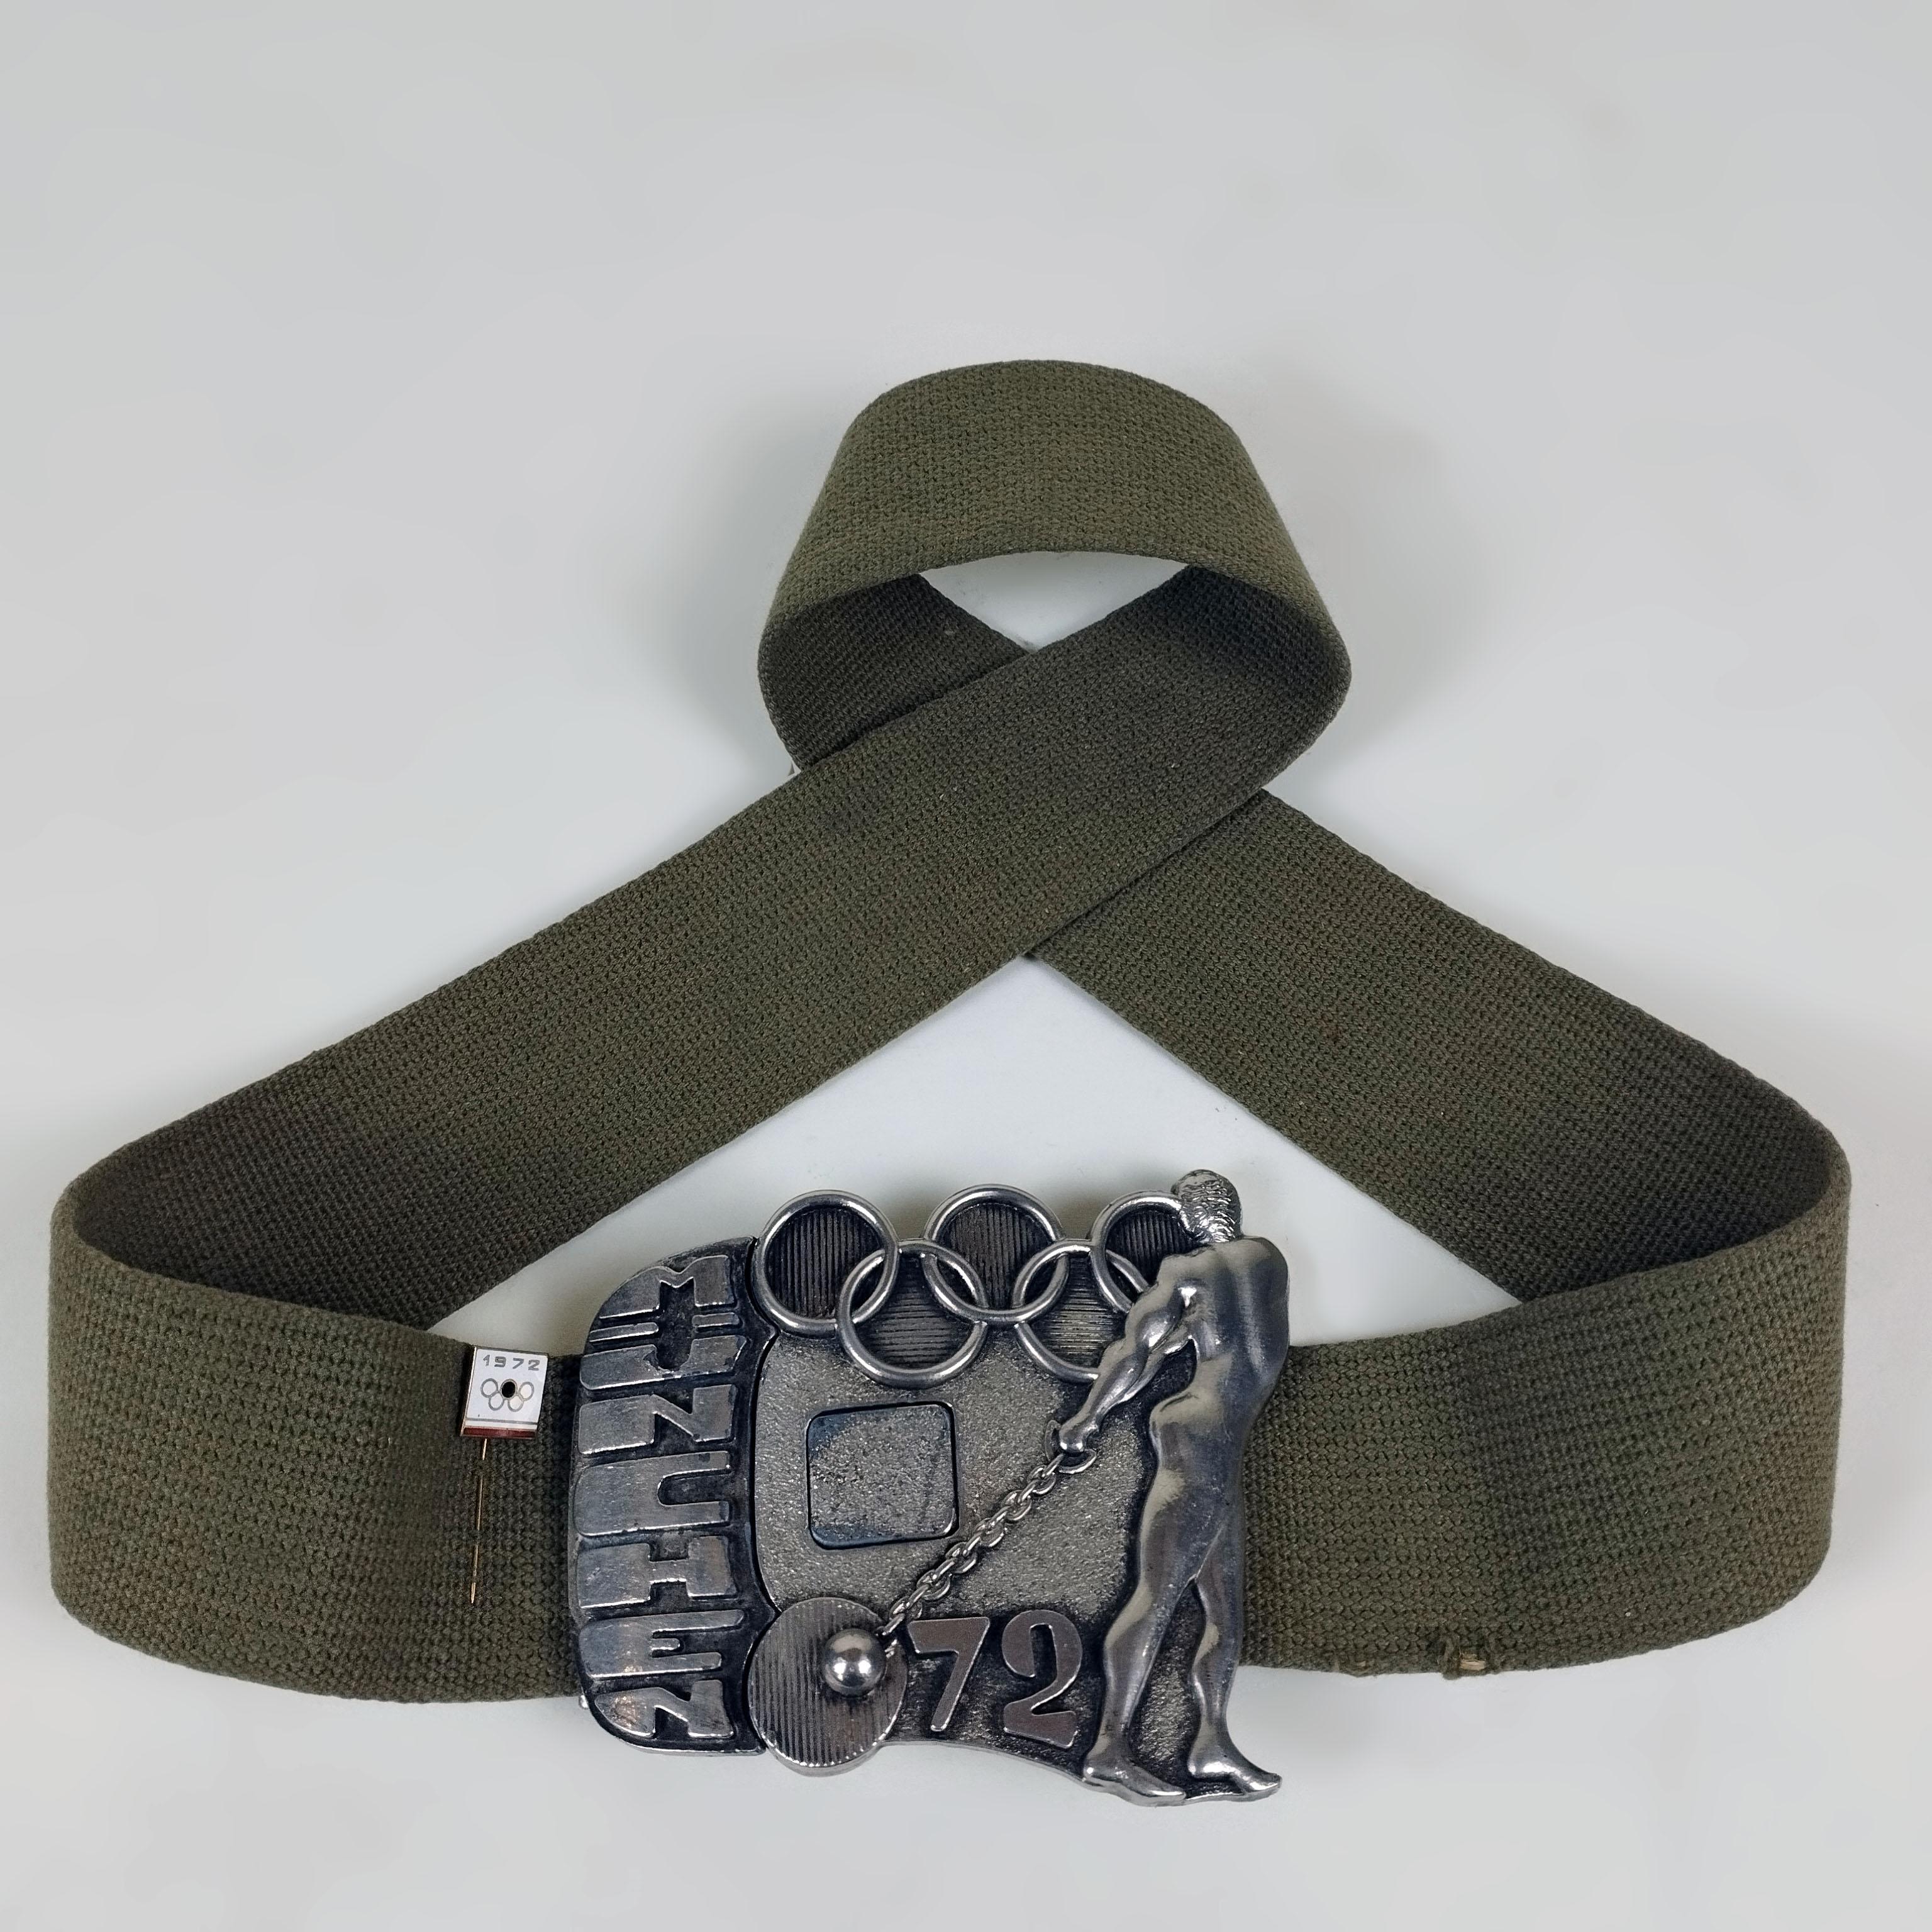 A 1972 Summer Olympics commemorative belt with metal buckle. The olive green fabric belt shows mild marks of wear. The metal buckle features the Olympic rings, the MÜNCHEN 72 words and a hammer thrower. The buckle has a metal pin attached to it.